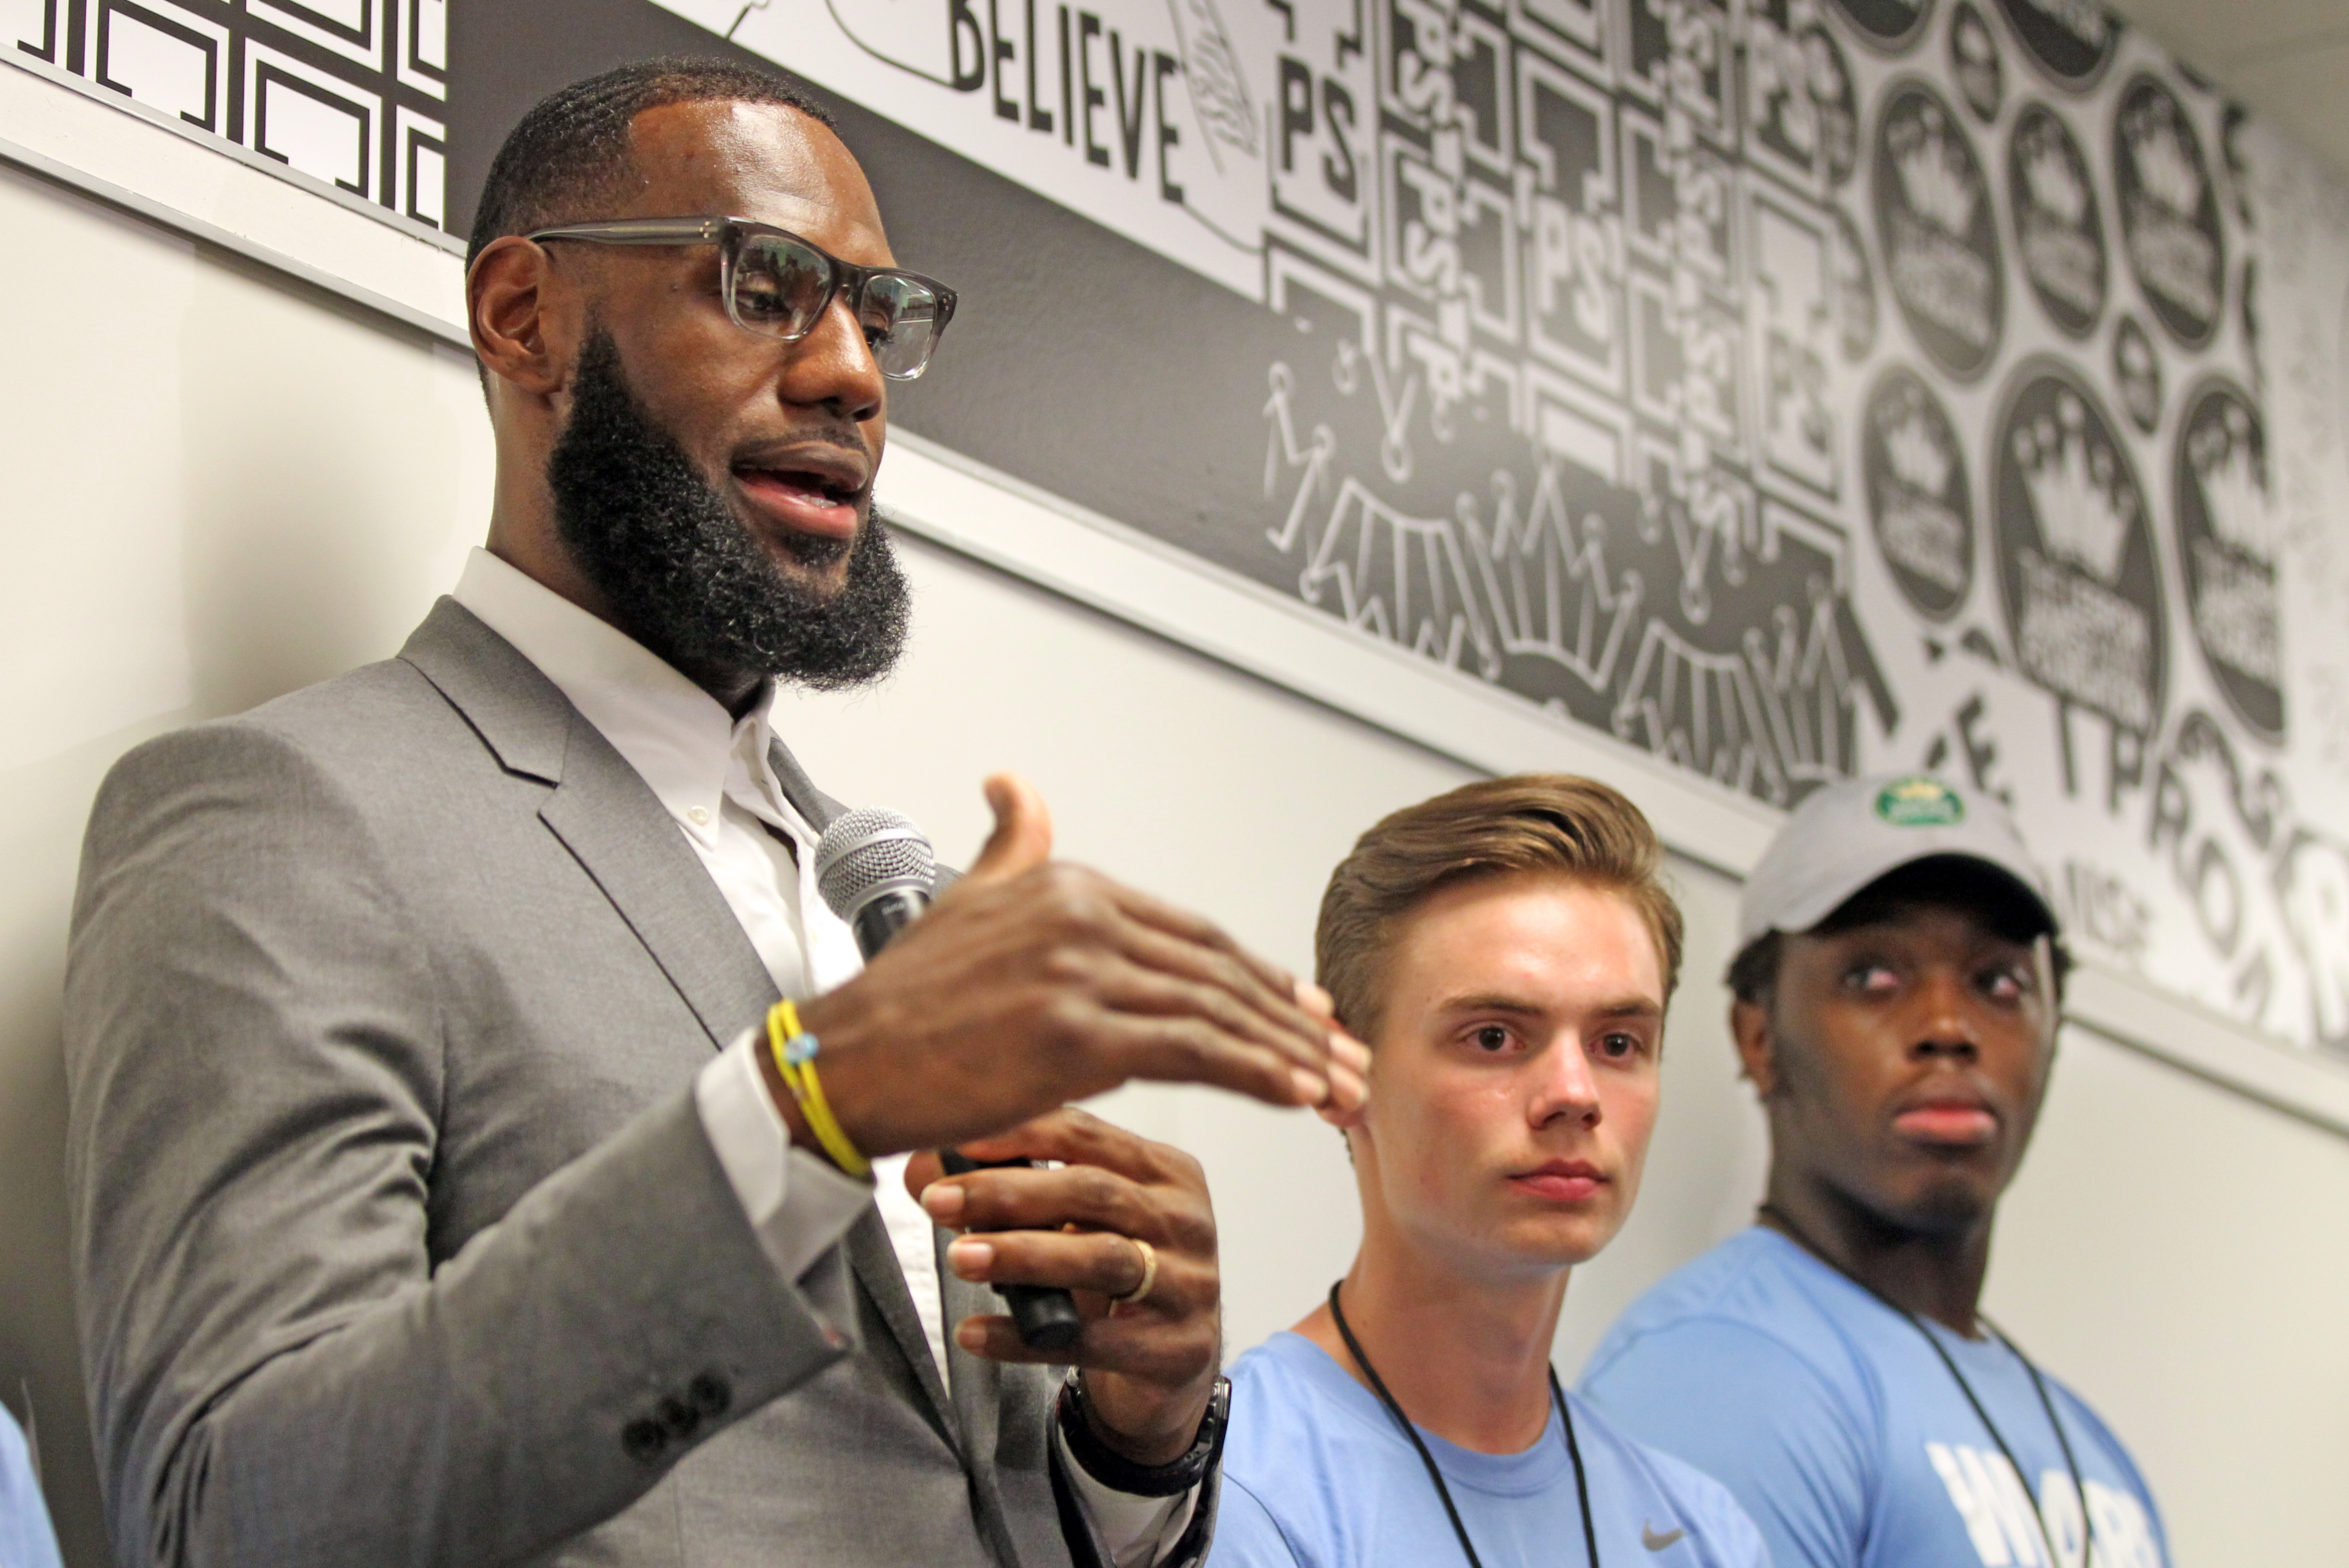 LeBron James answers questions from the media during the grand opening of the LeBron James Family Foundation and Akron Public school's I Promise school Monday, July 30, 2018.  Joshua Gunter, cleveland.com